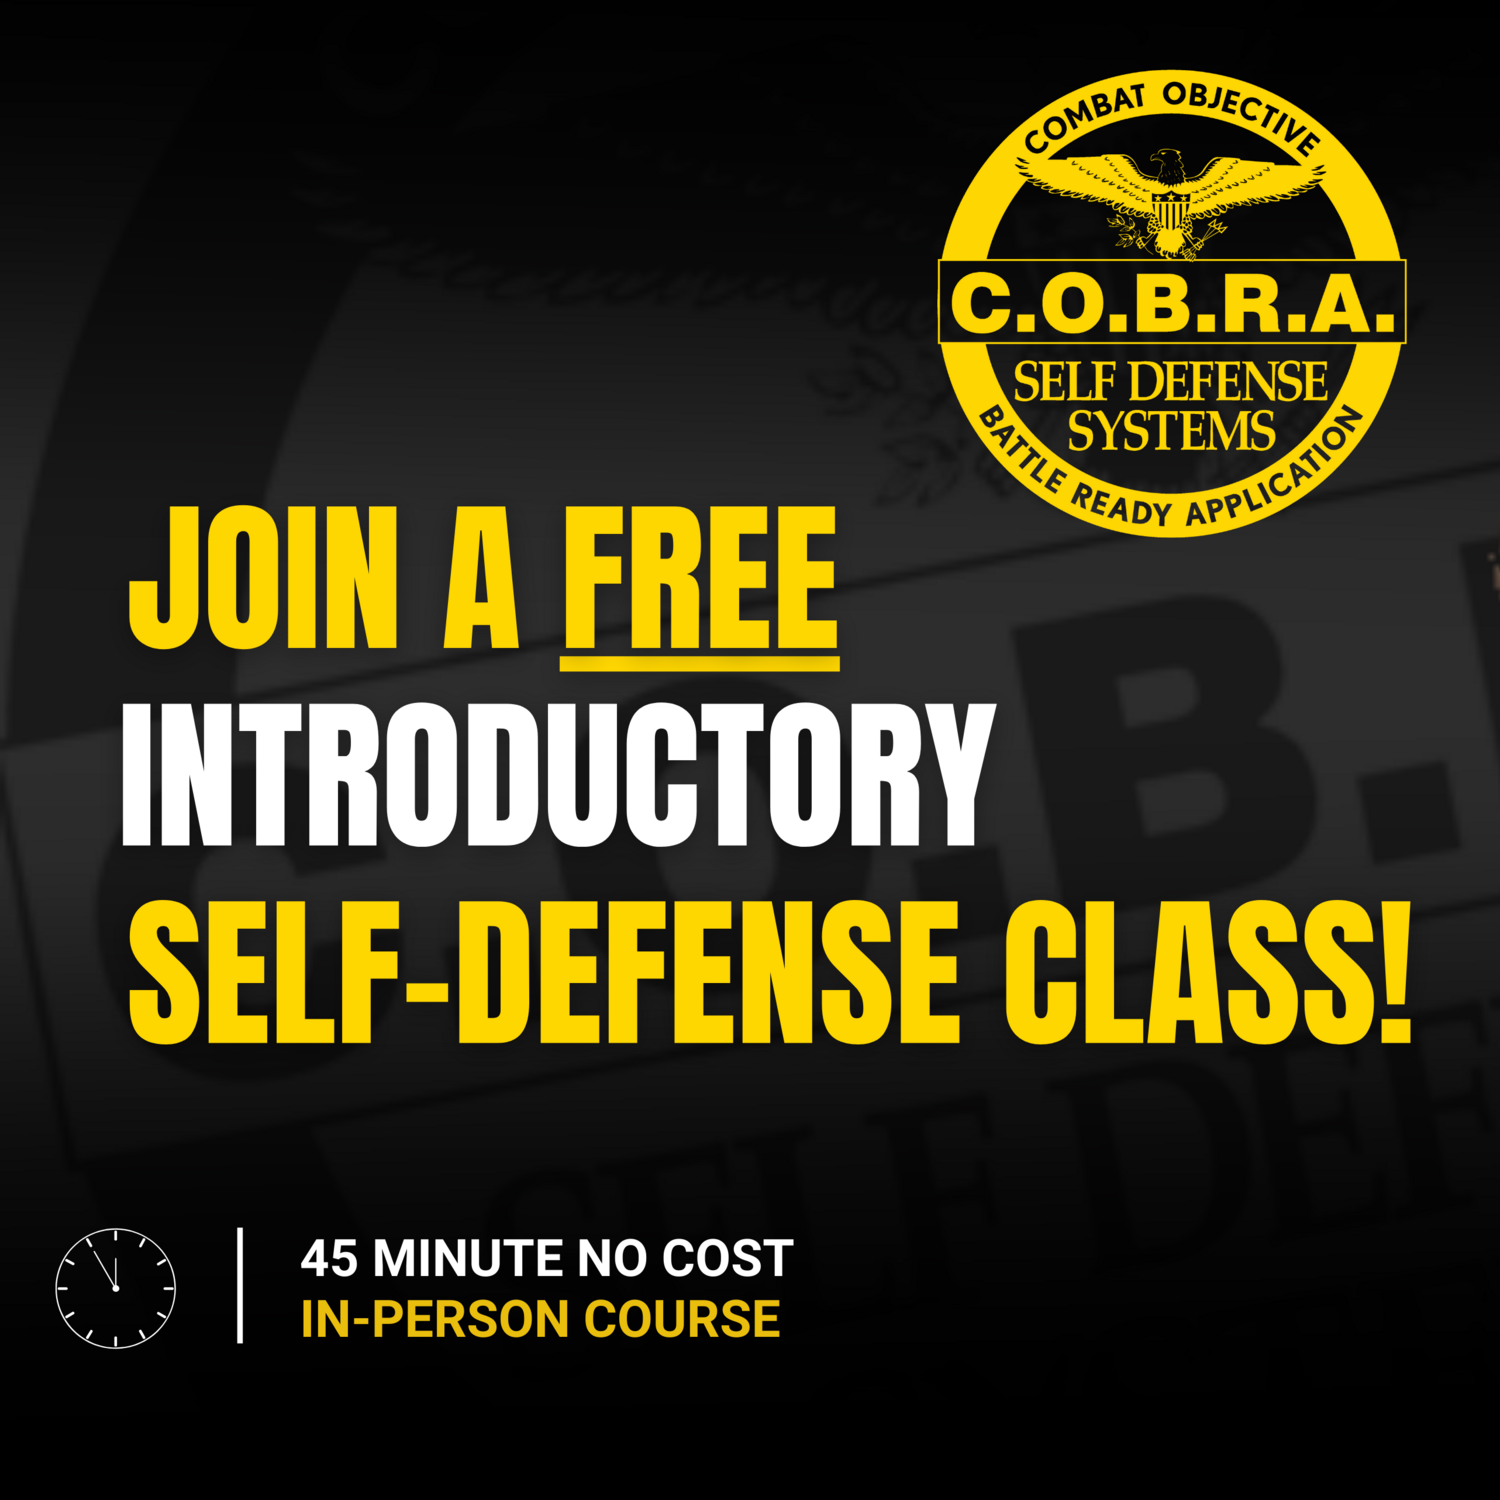 FREE INTRODUCTORY SELF-DEFENSE CLASS